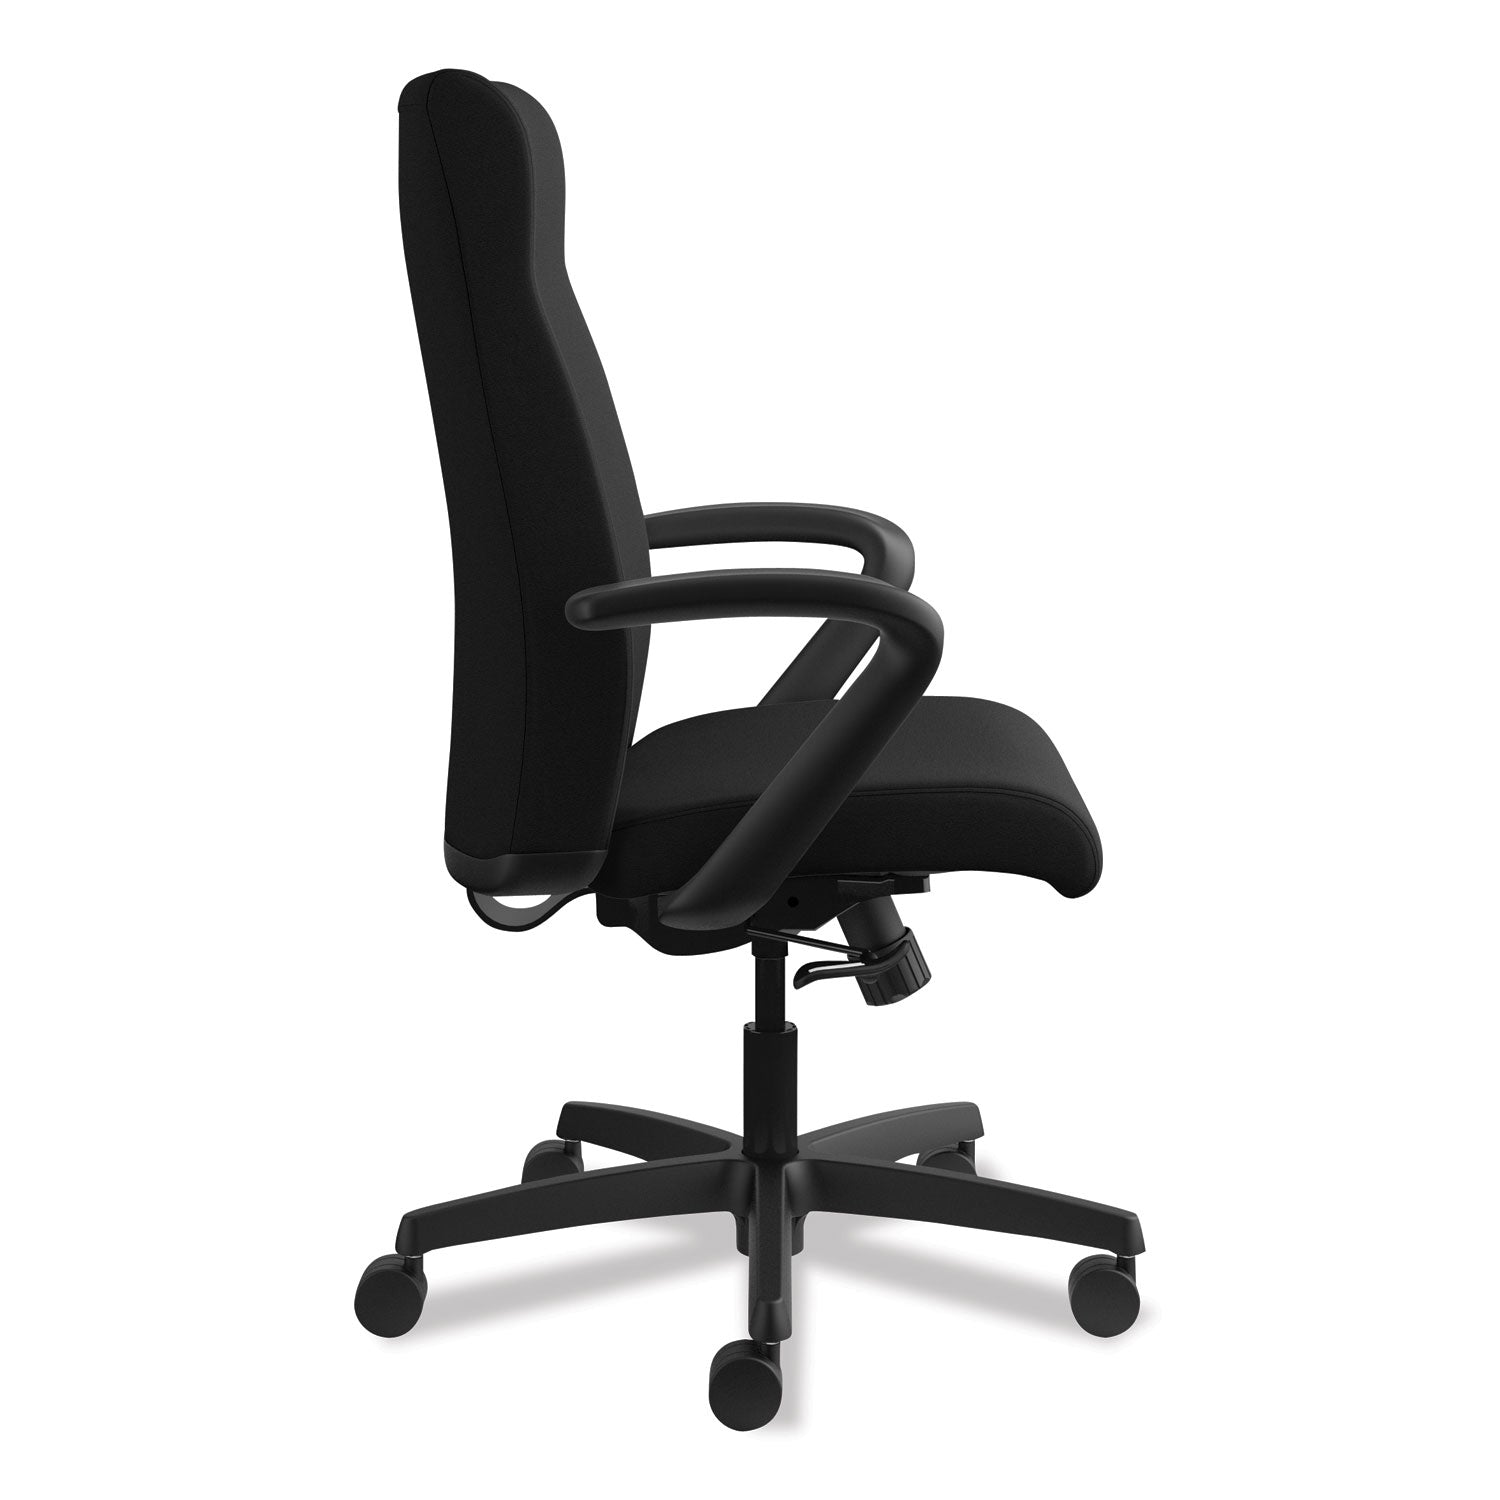 ignition-series-executive-high-back-chair-supports-up-to-300-lb-17-to-21-seat-height-black_honie102cu10 - 4